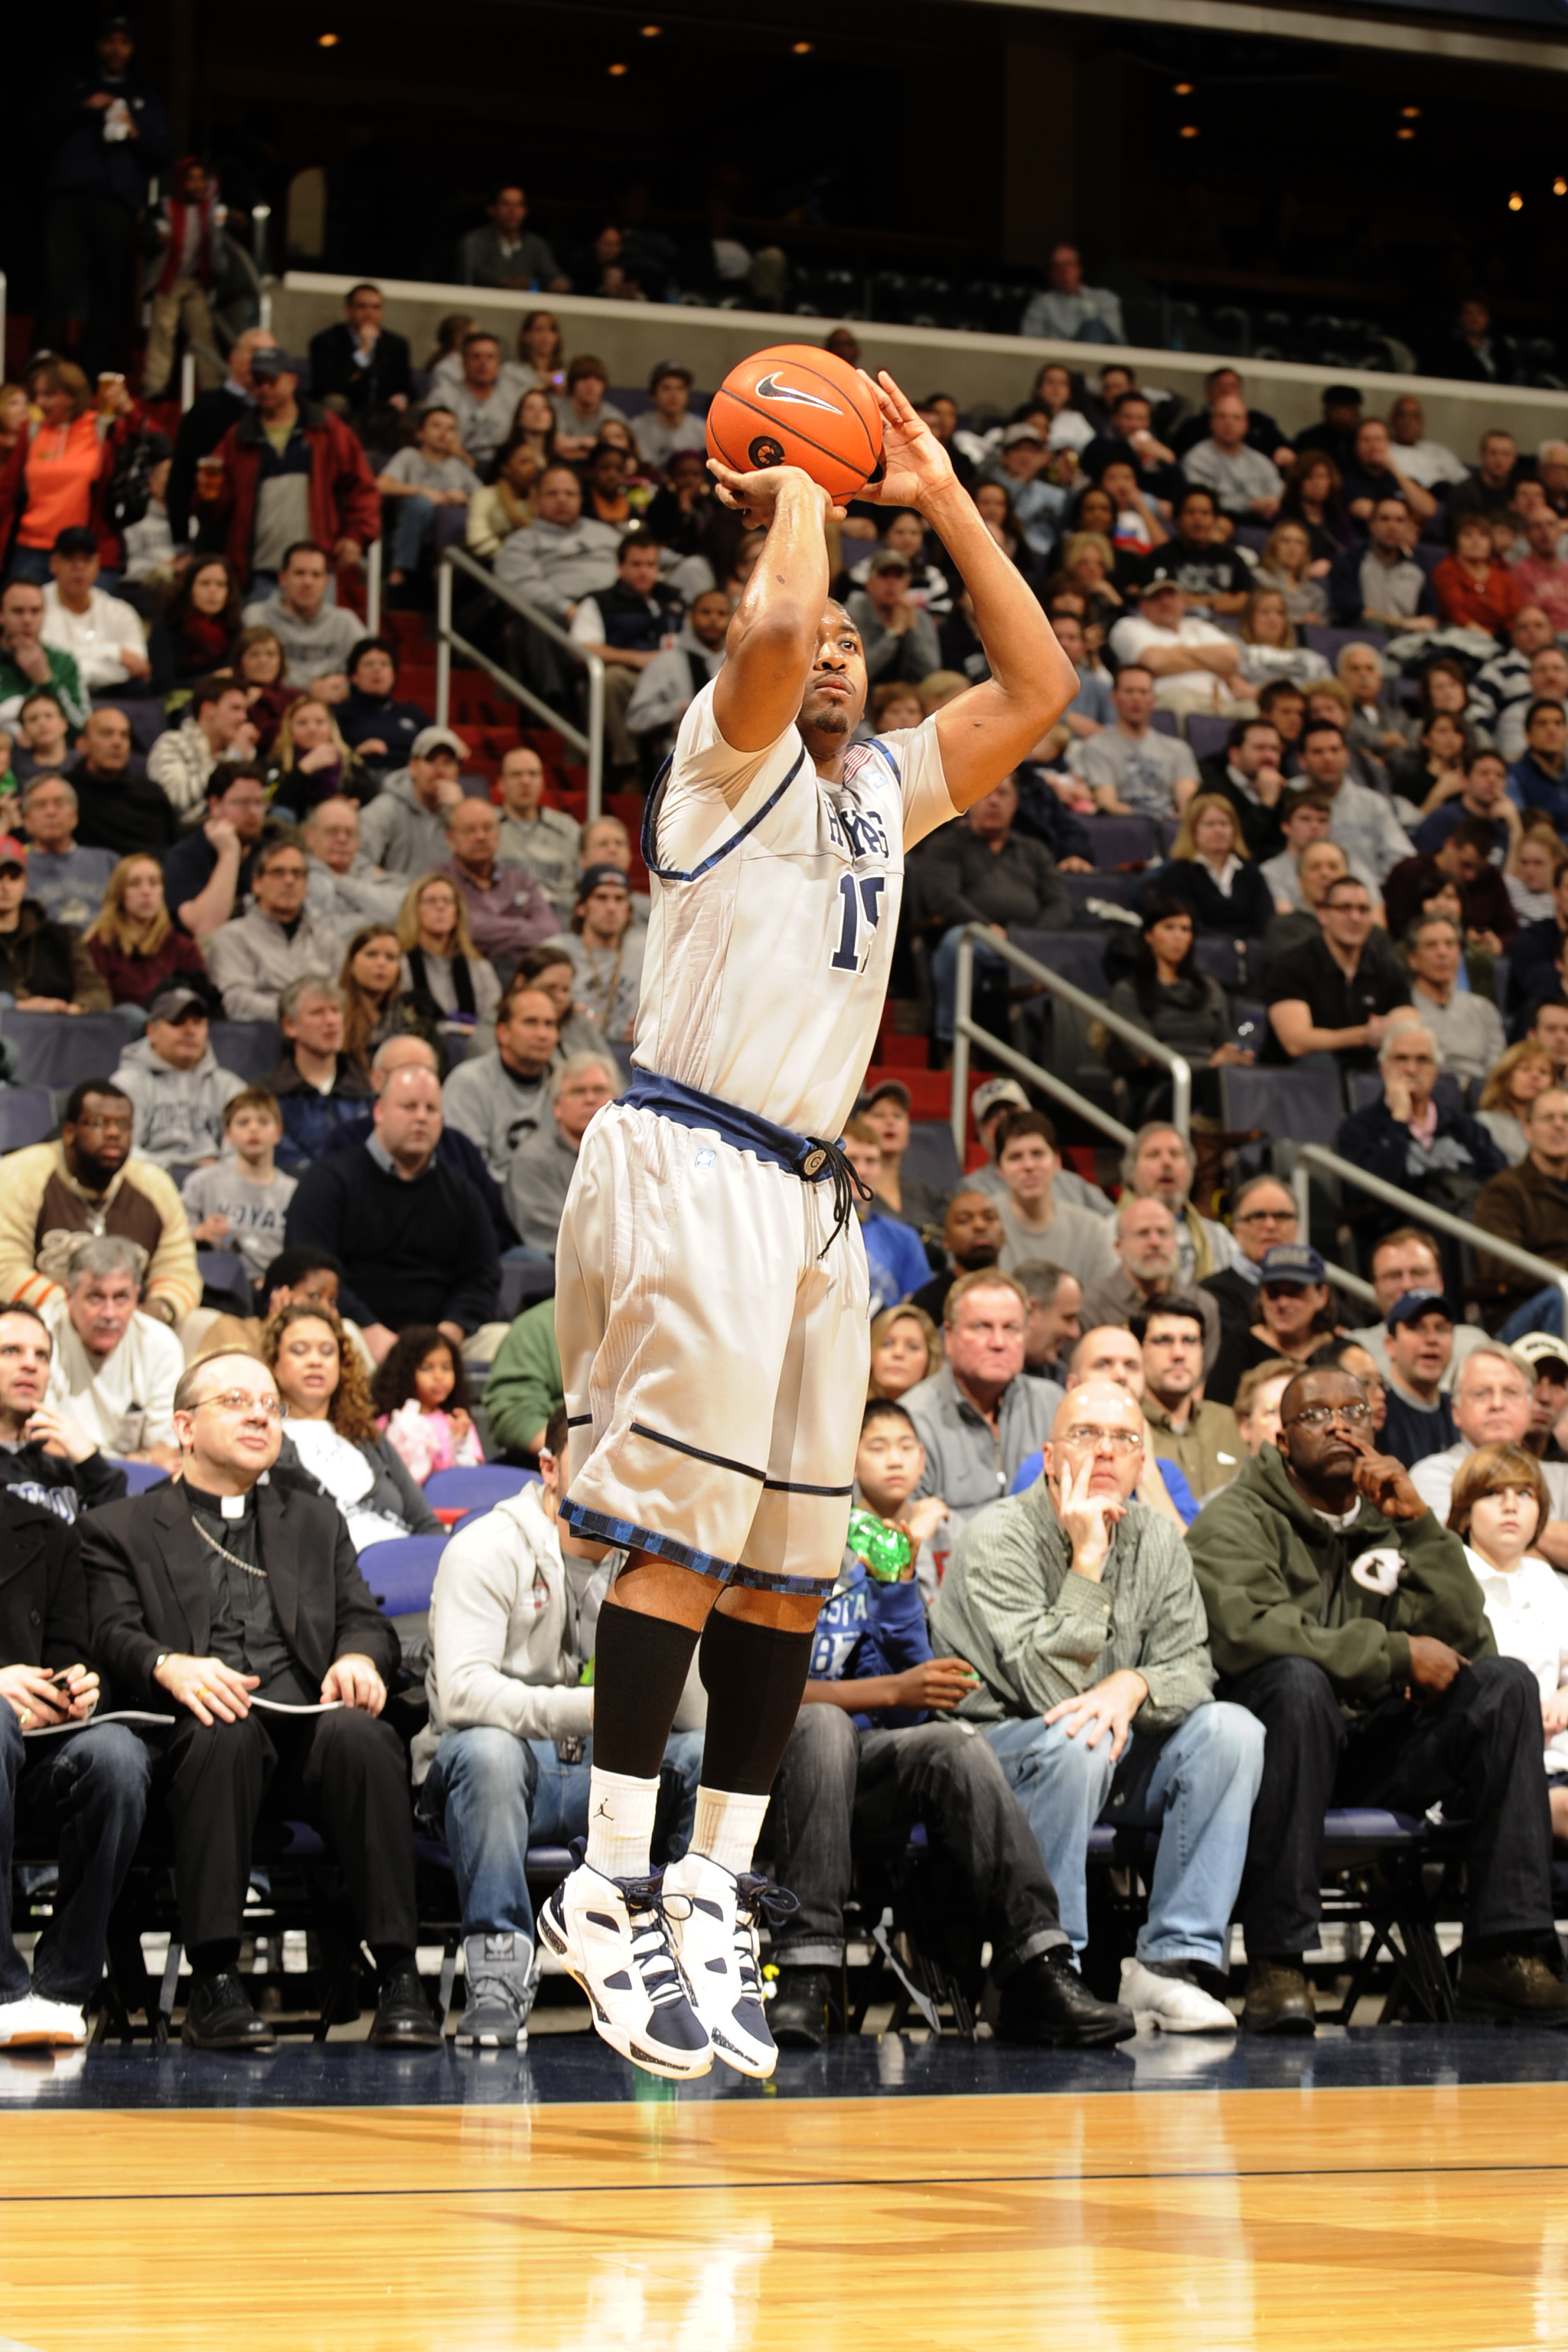 WASHINGTON, DC - FEBRUARY 5:  Austin Freeman #15 of the Georgetown Hoyas takes a jump shot during a college basketball game against the Providence Friars on February 5, 2011 at the Verizon Center in Washington, DC.  The Hoyas won 83-81.  (Photo by Mitchel